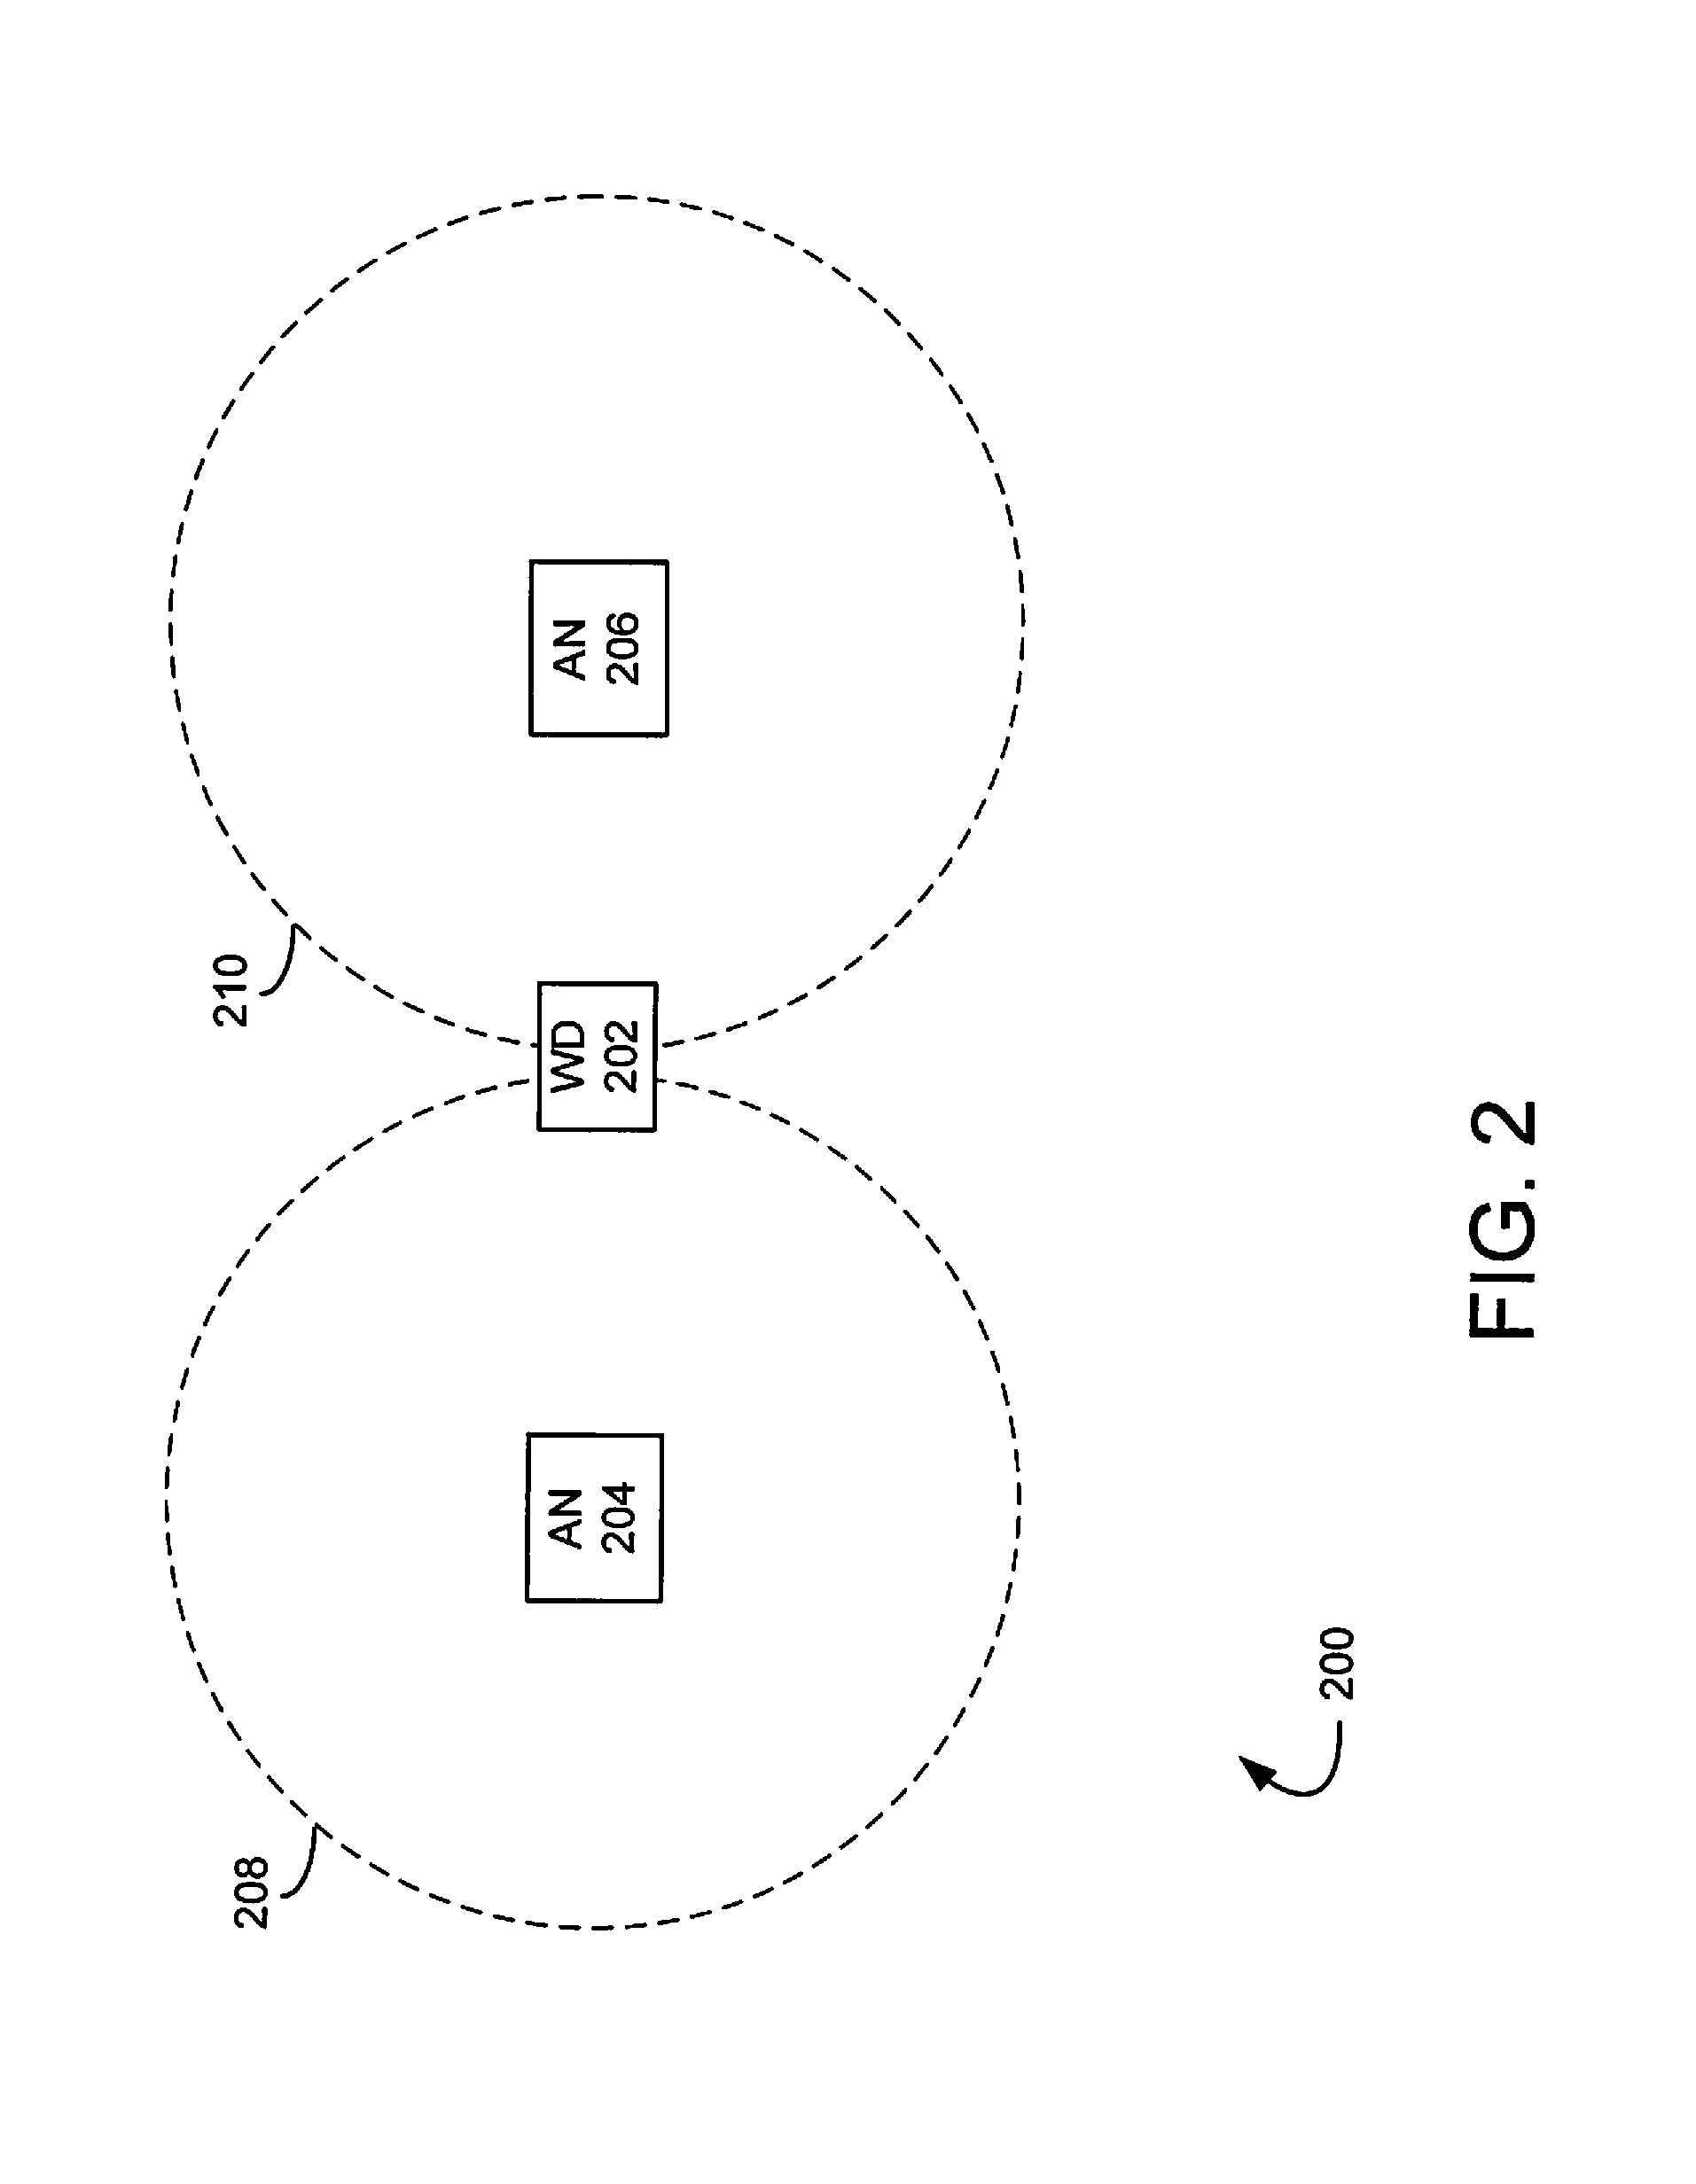 Systems and methods for determinng access node candidates for handover of wireless devices